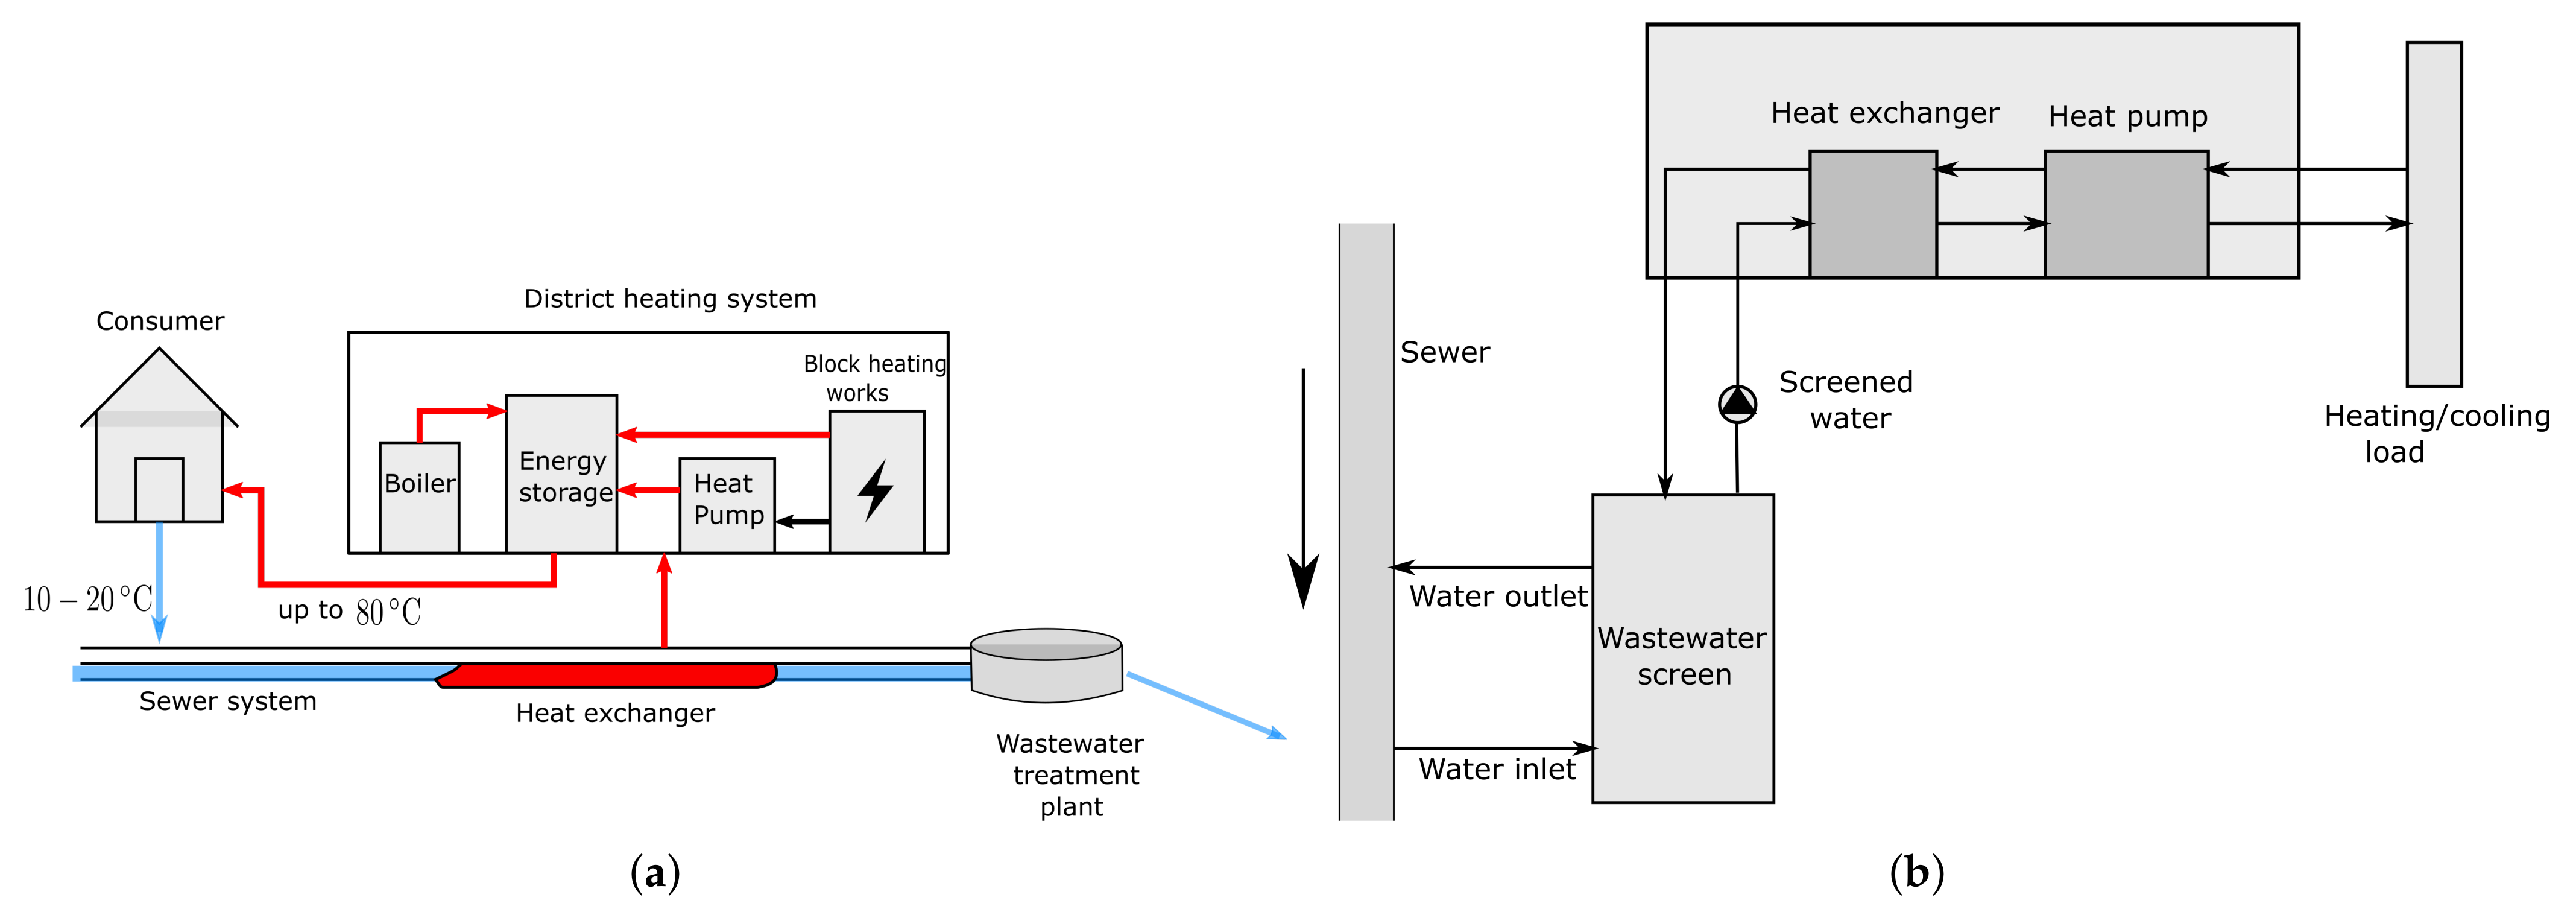 https://pub.mdpi-res.com/water/water-13-01274/article_deploy/html/images/water-13-01274-g005.png?1620362213